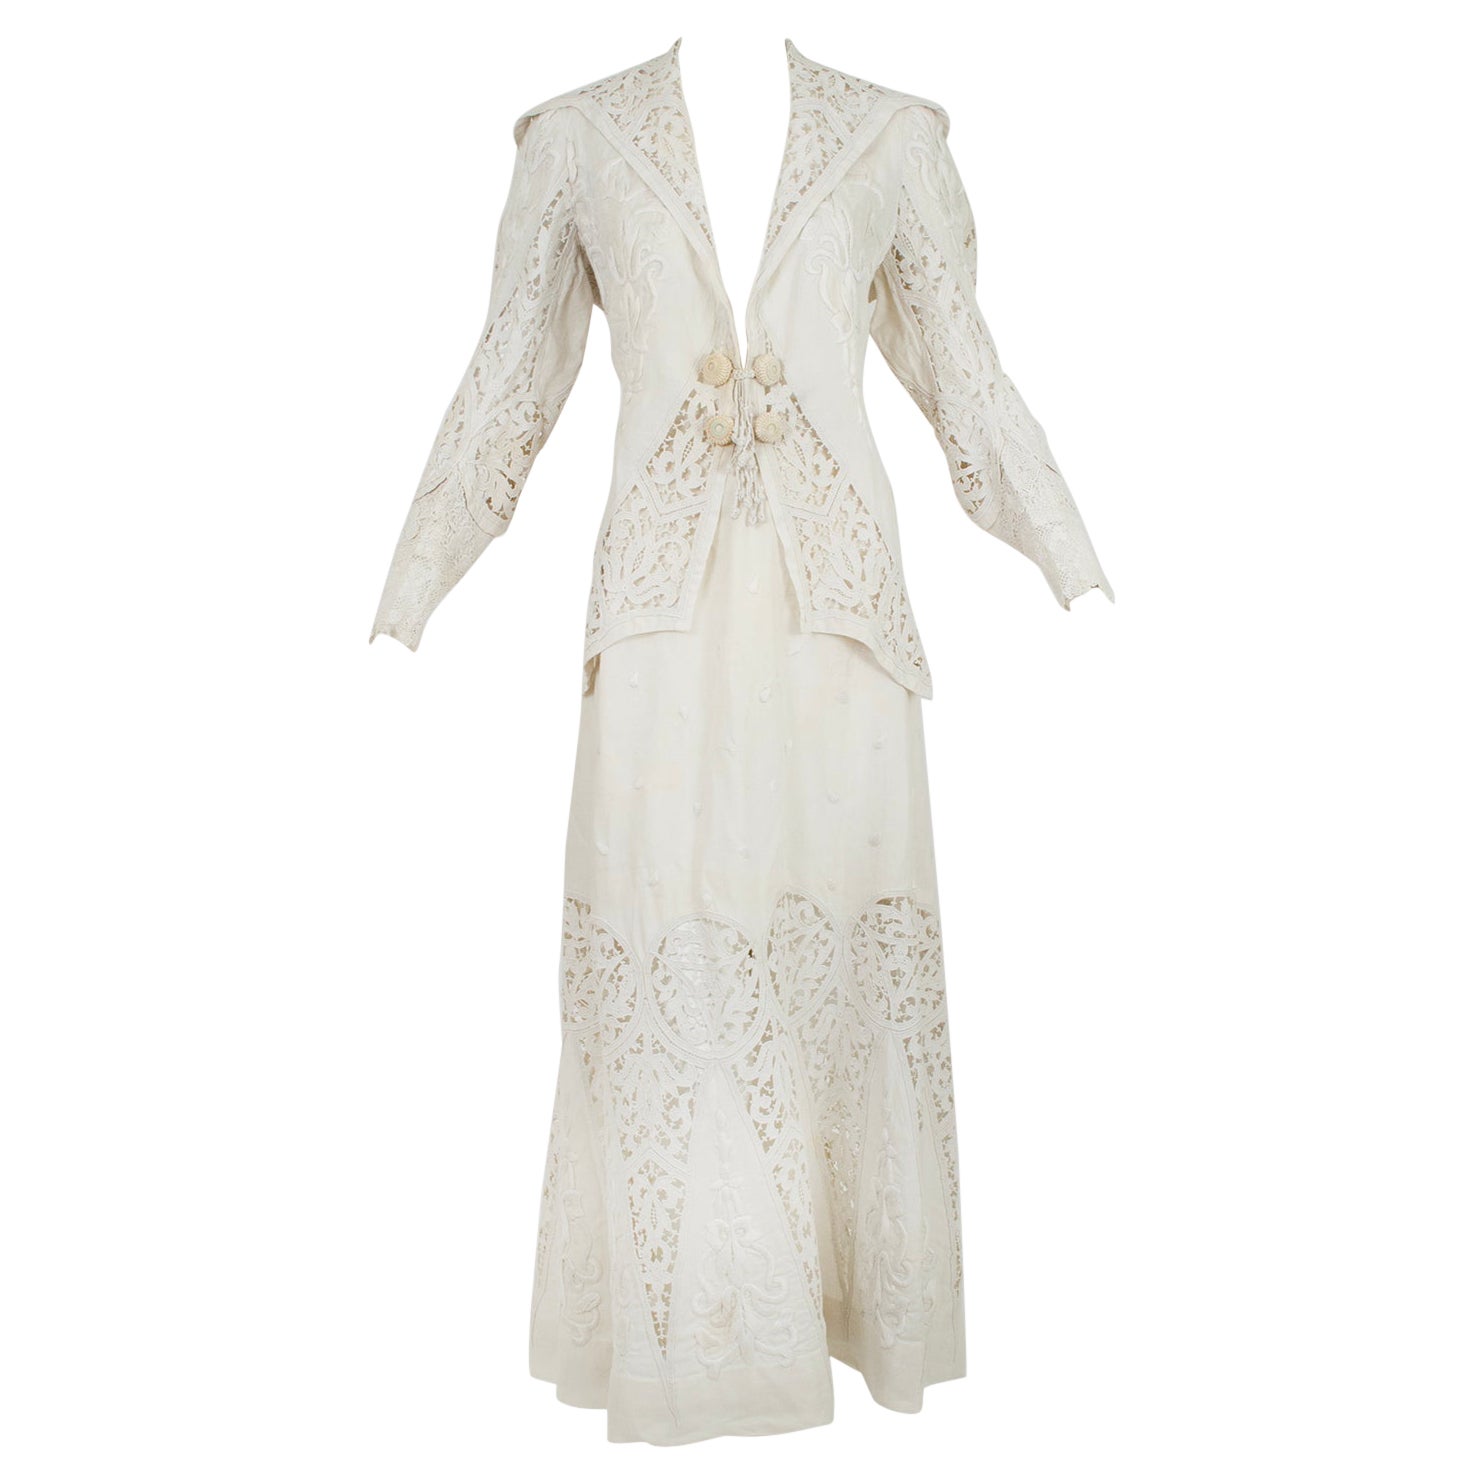 Edwardian White Irish Crochet and Cotton Walking or Wedding Suit – L, 1900s For Sale